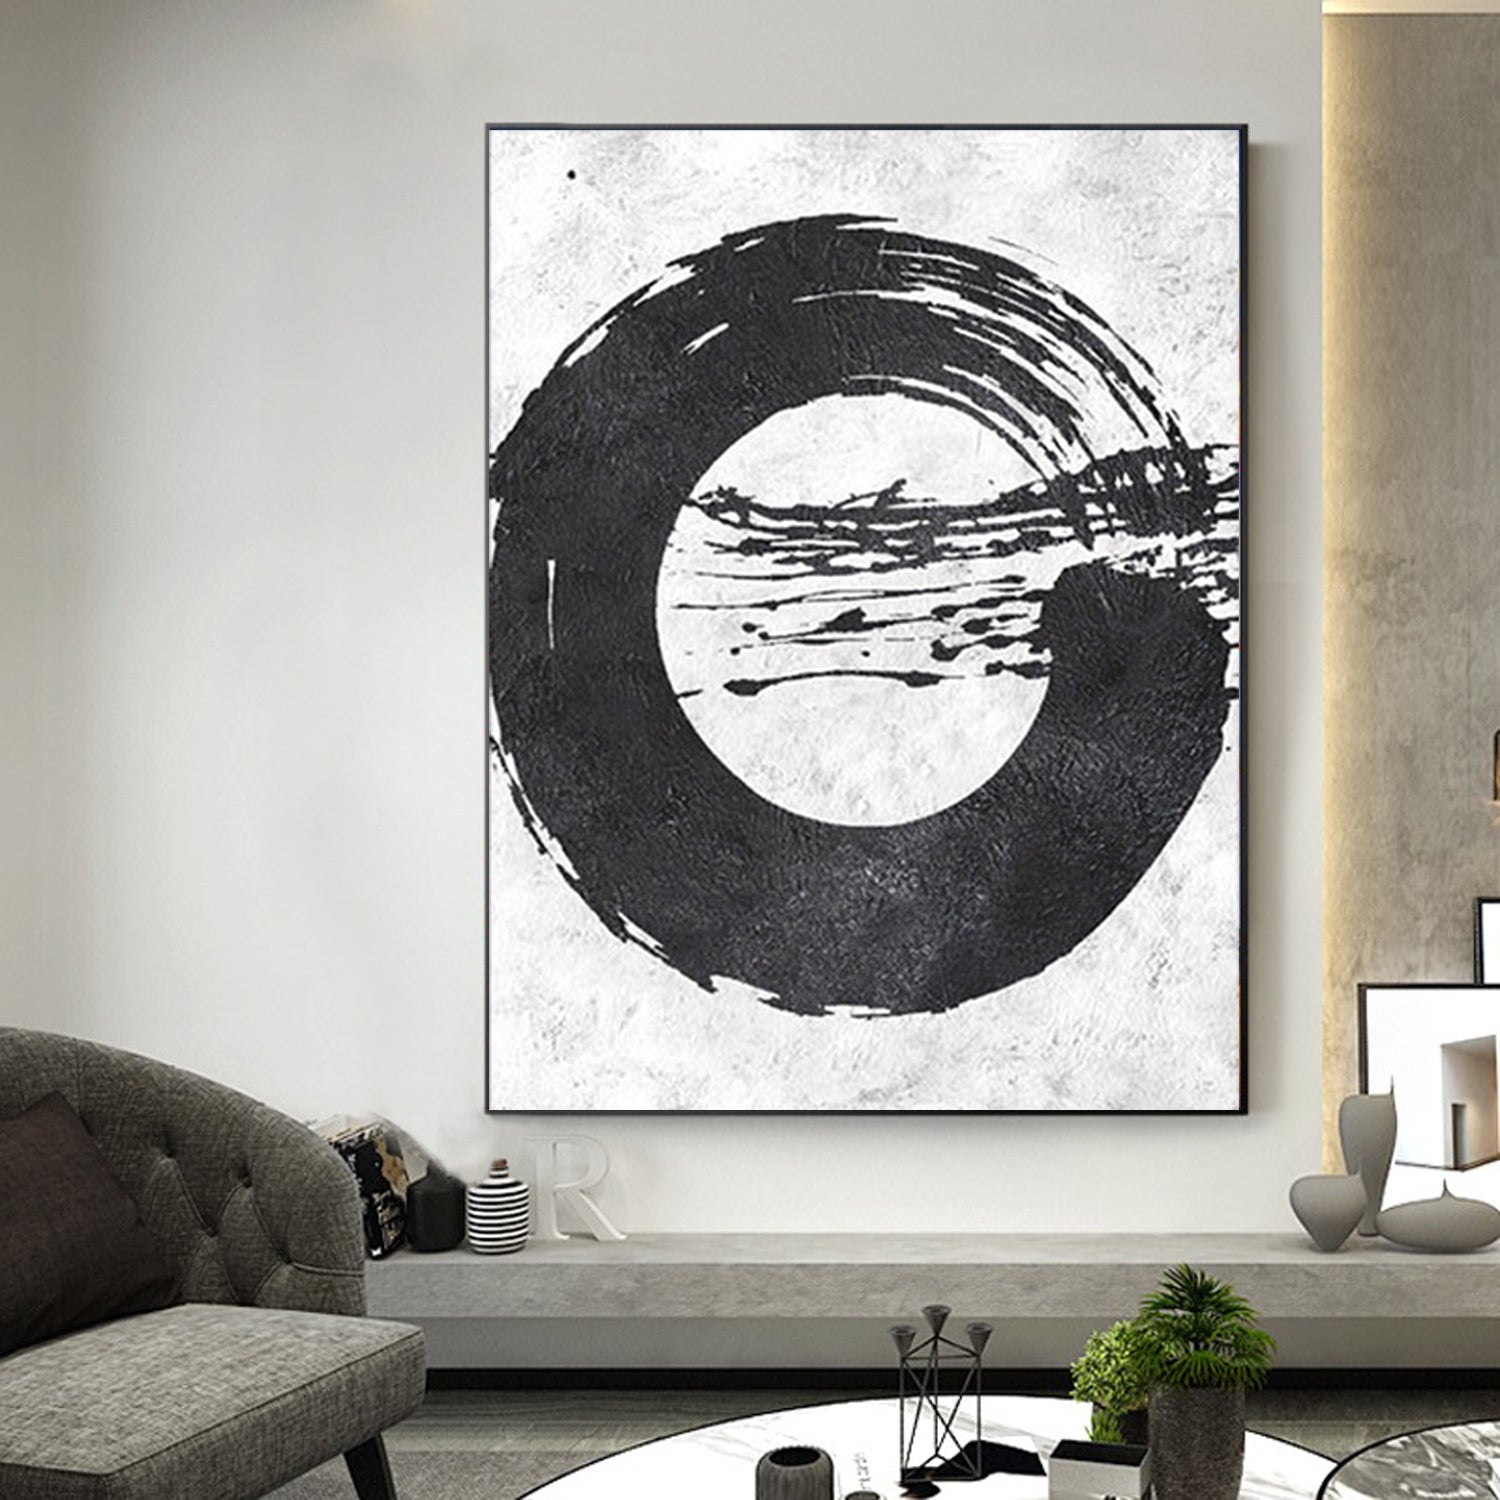 Oversized black and white canvas art, large contemporary art